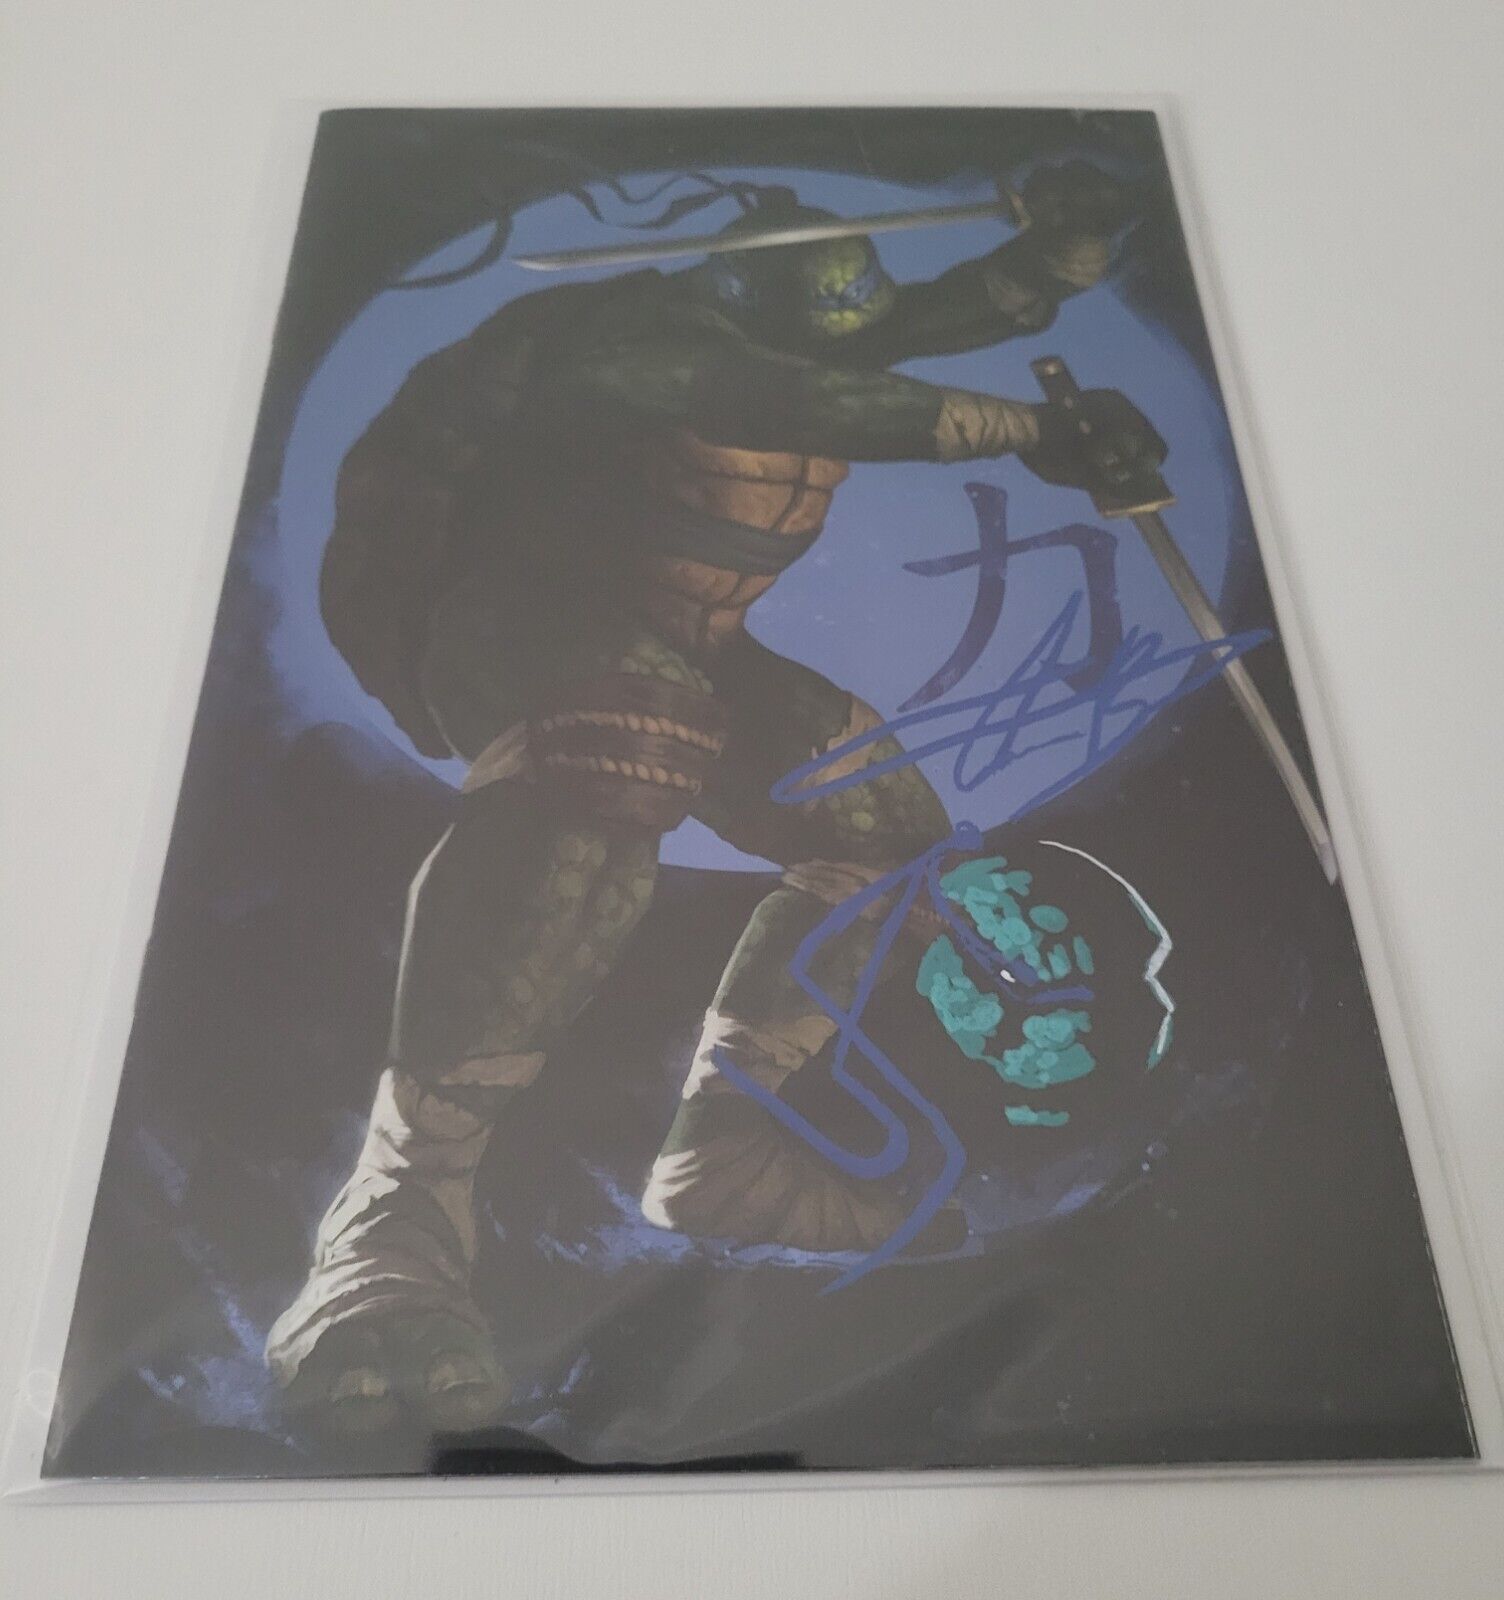 TMNT #1 signed and remarque by Aaron Bartling with COA - Leonardo